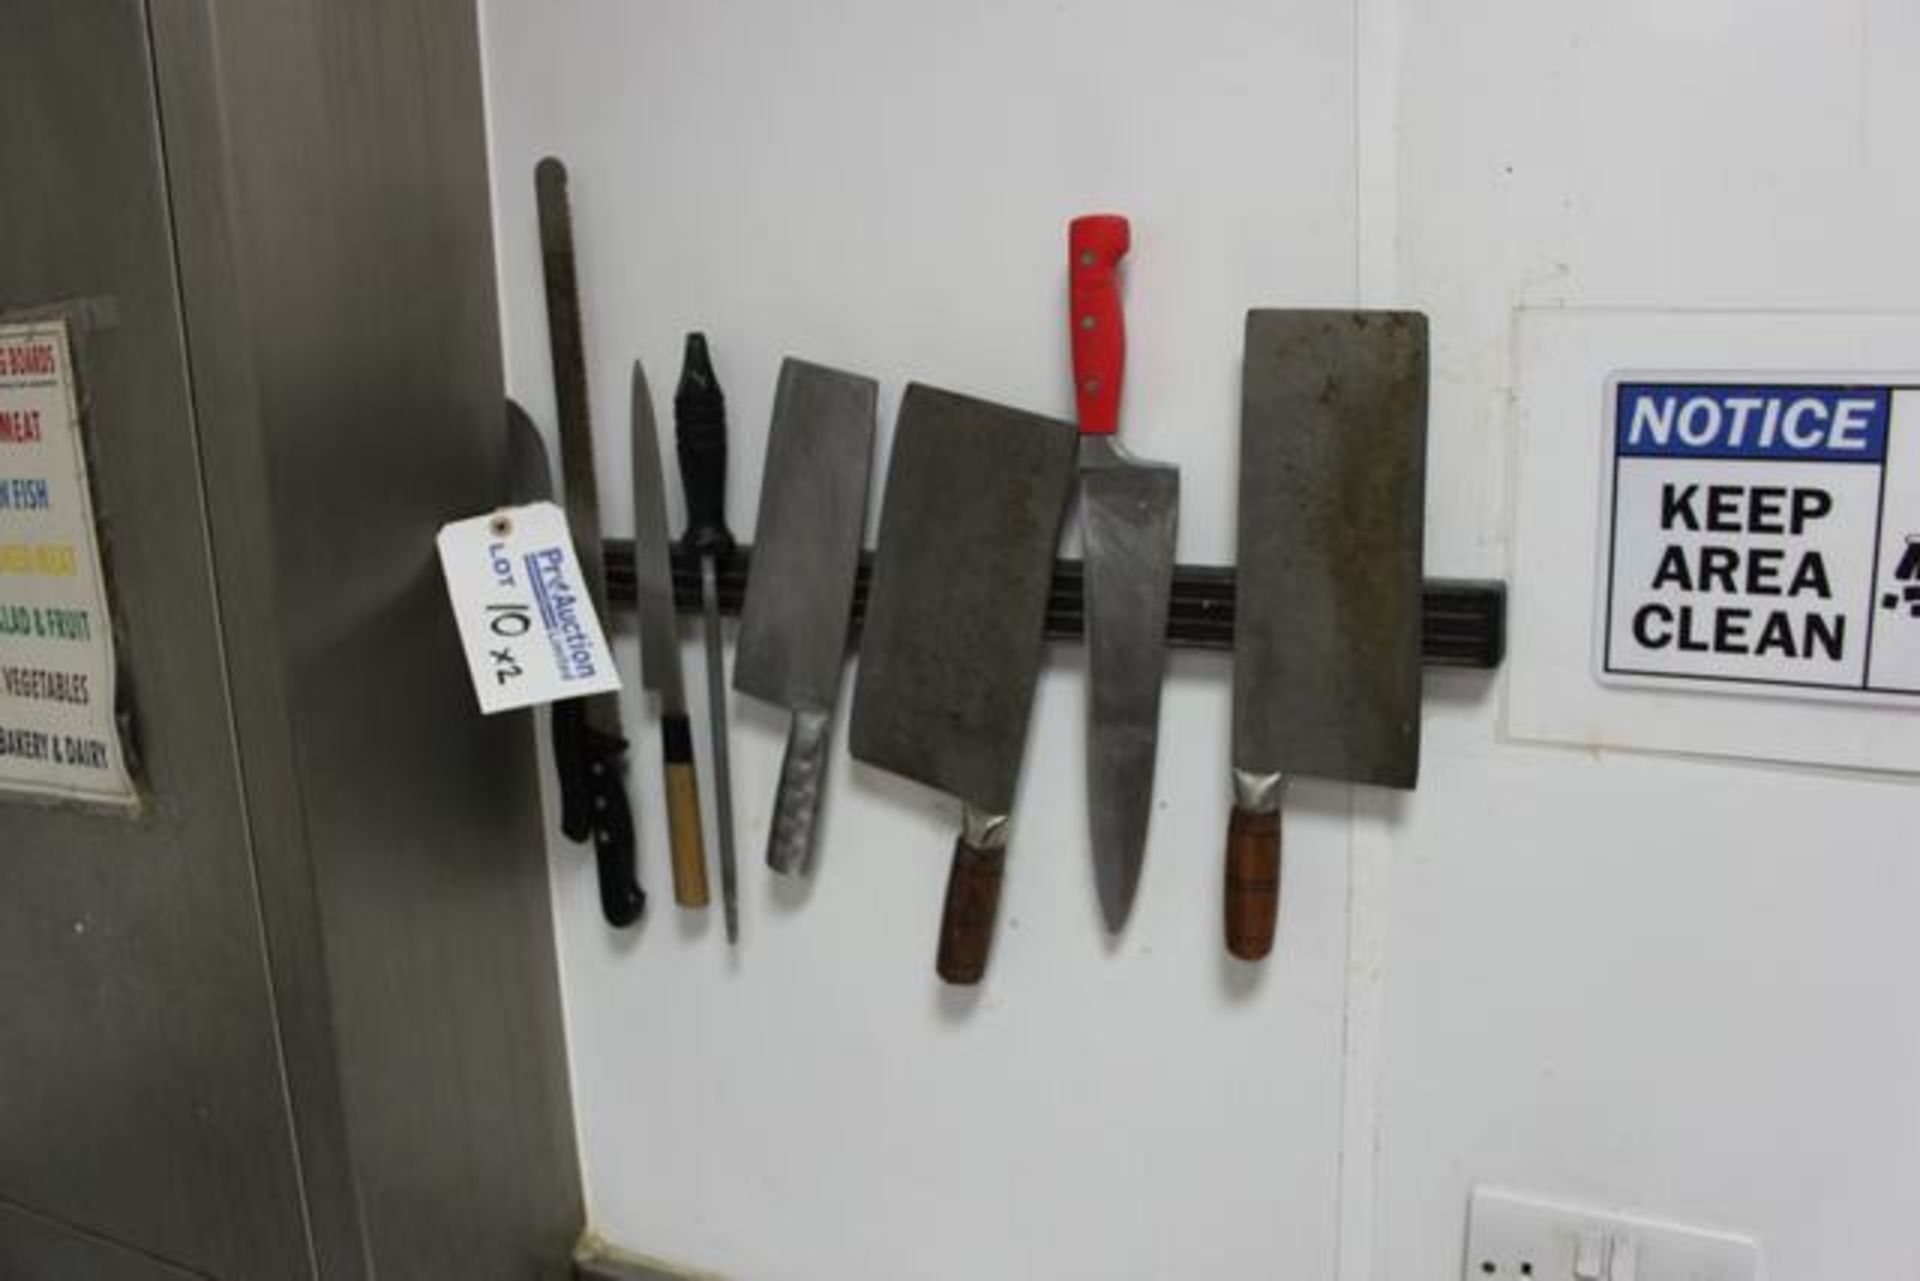 2 x wall mounted professional magnetic knife holders with various knives and sharpeners  Lift out